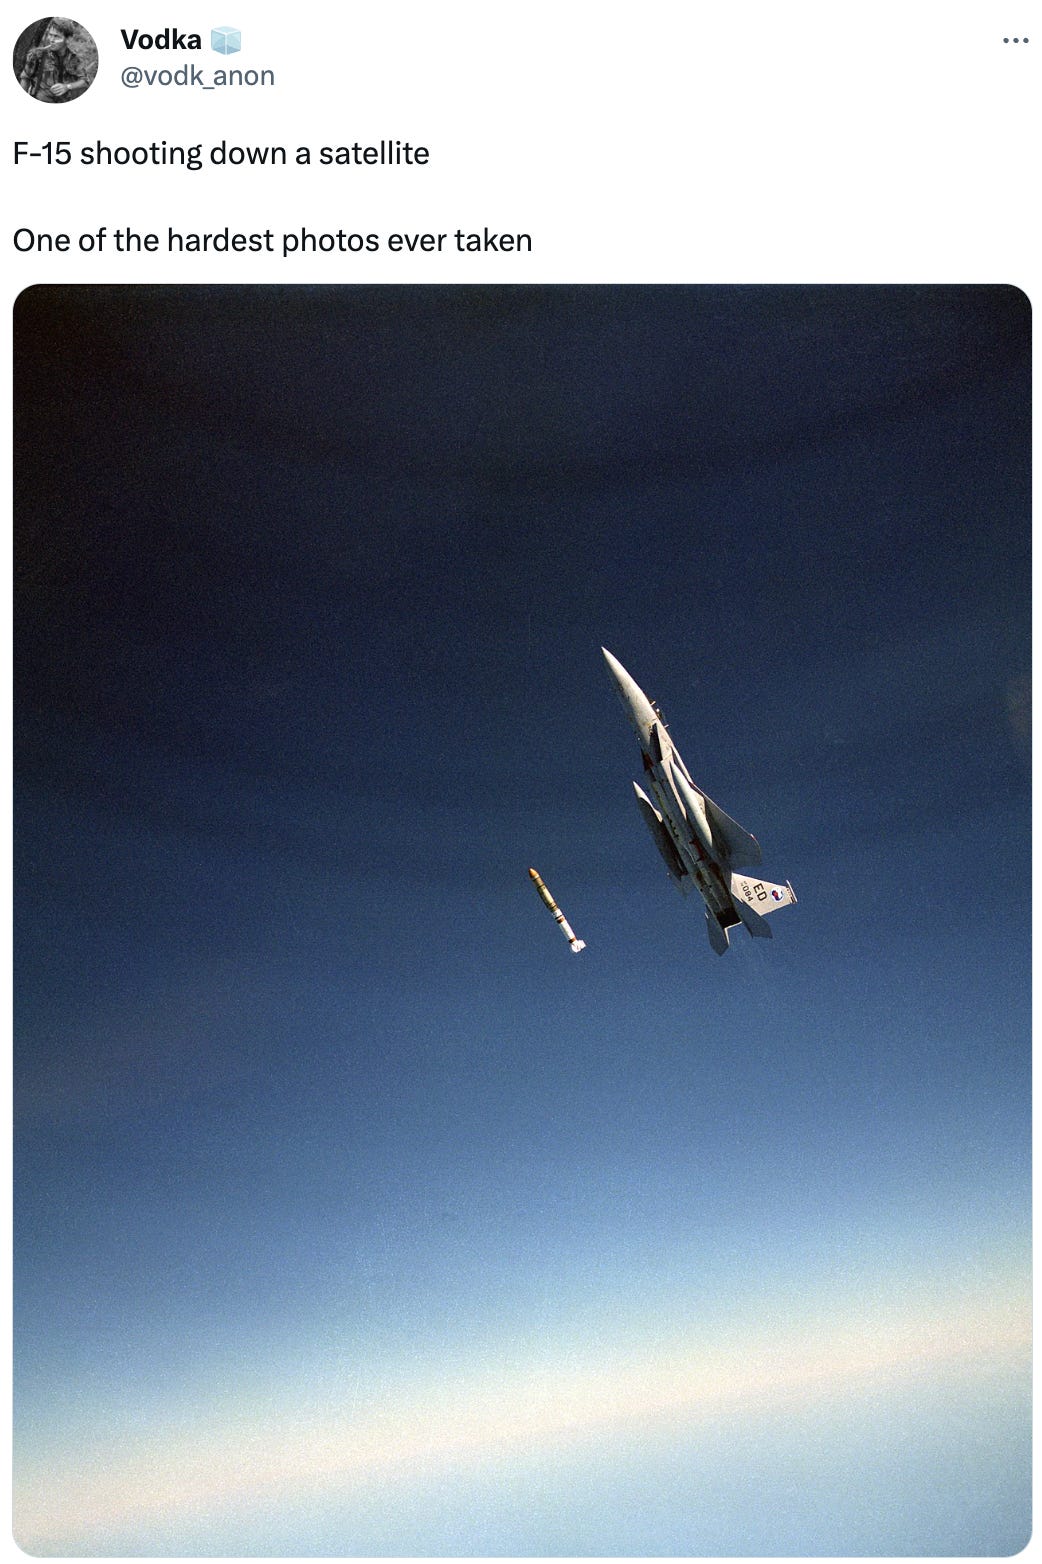  Vodka 🧊 @vodk_anon F-15 shooting down a satellite  One of the hardest photos ever taken Quote Tweet PAVE_naught @PAVE_naught · 15h ASM-135, the only dedicated air-to-orbit missile ever launched. with the capability to engage targets in LEO, it was to allow for unpredictable and otherwise difficult-to-counter anti-satellite strikes. while successful in testing, cost prevented it from entering service.